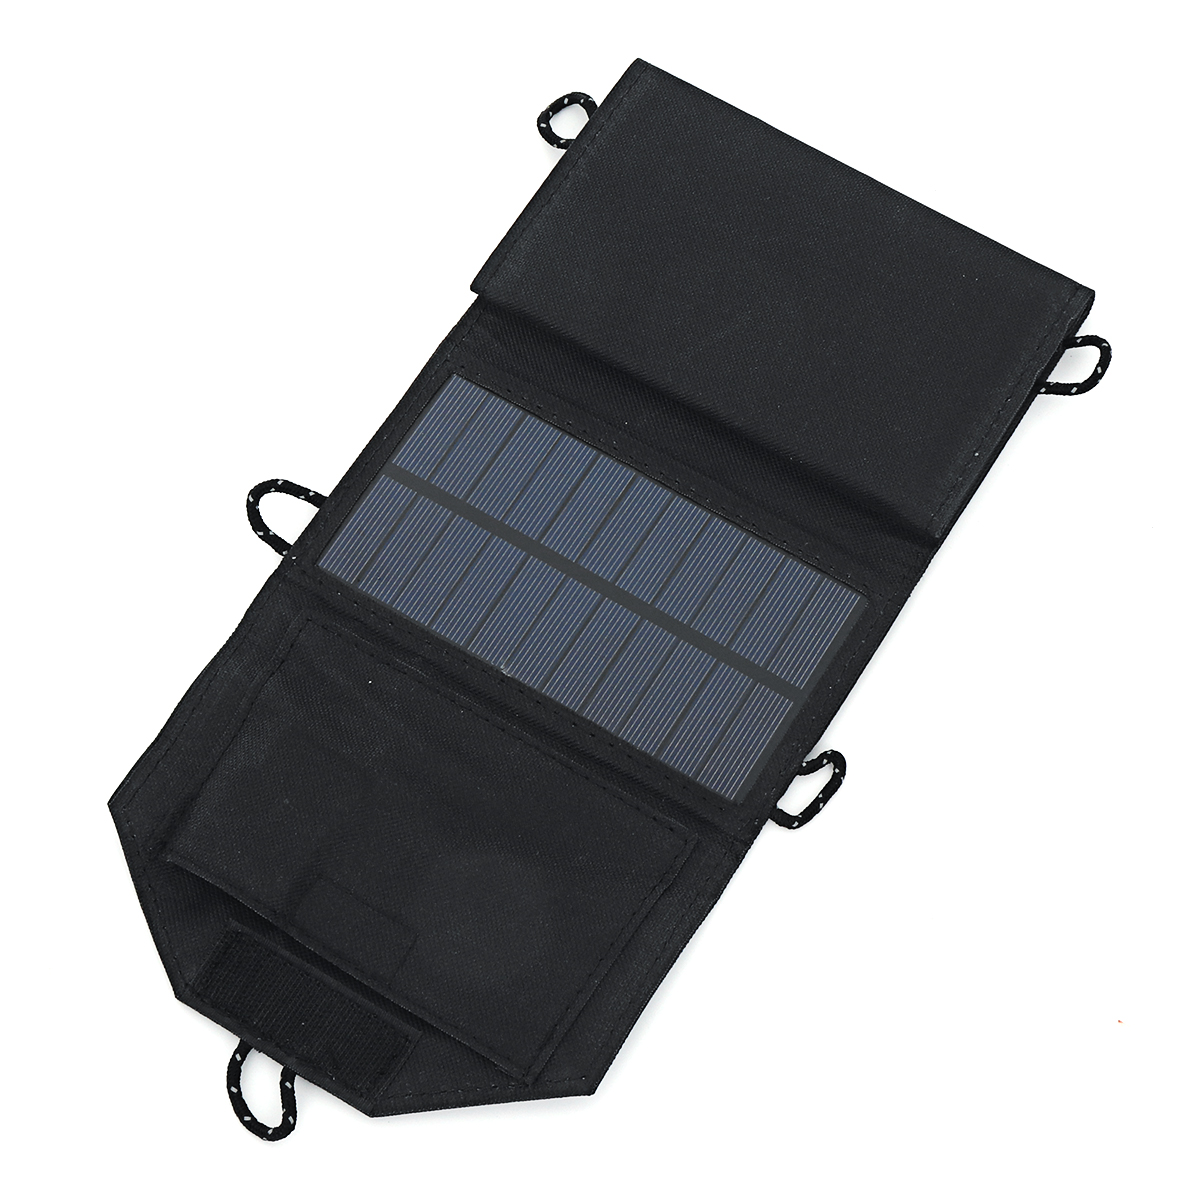 10W Polysilicon Portable Foldable Solar Panel  for Outdoor Working